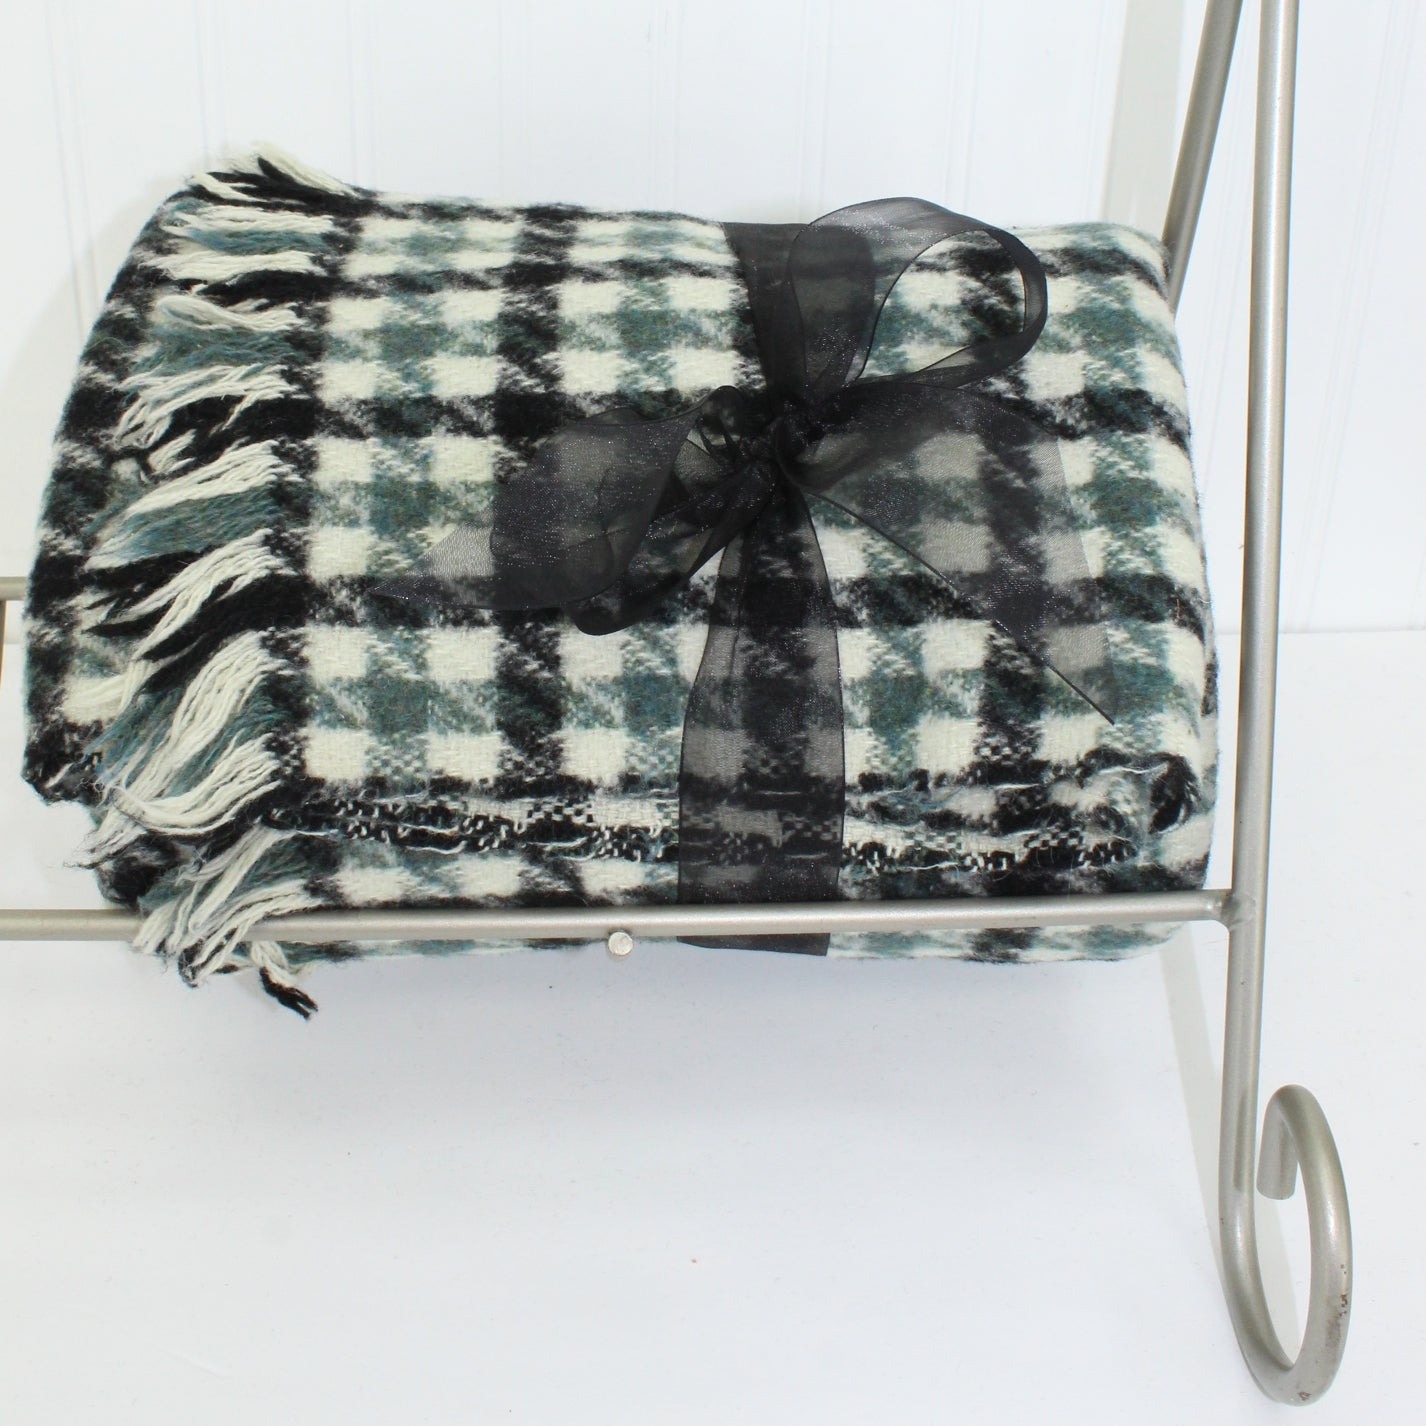 Rare Dewey's of Vermont Soft Wool Throw Handsome Teal & Black Plaid Vintage Pre 1972 collectible